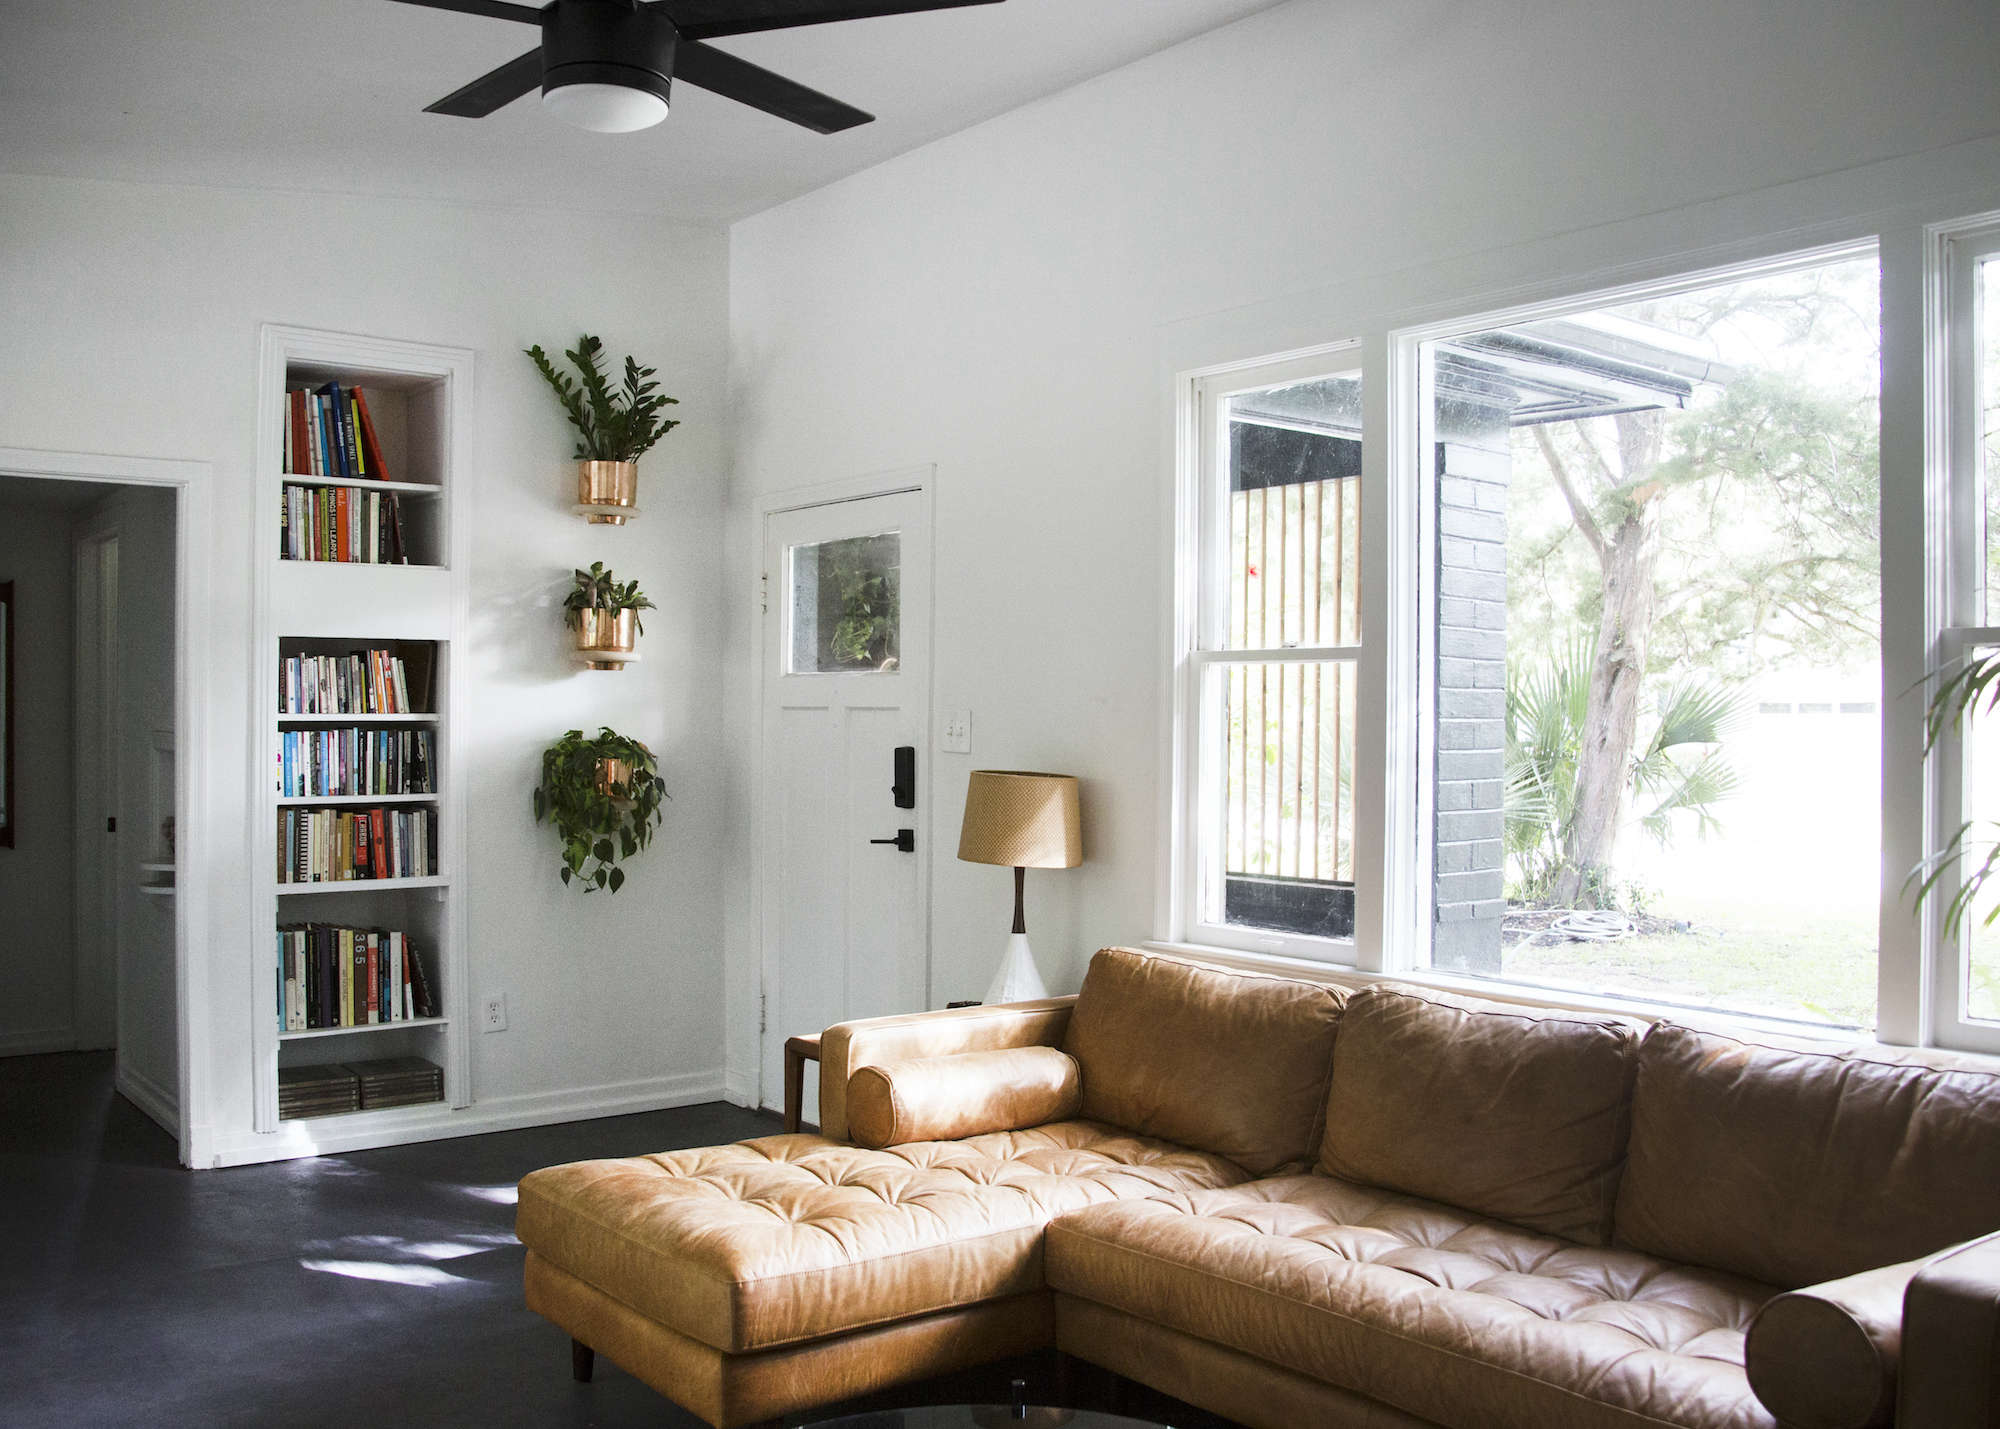 Before & After: A Design Duo’s Whole-House Overhaul for $15,000